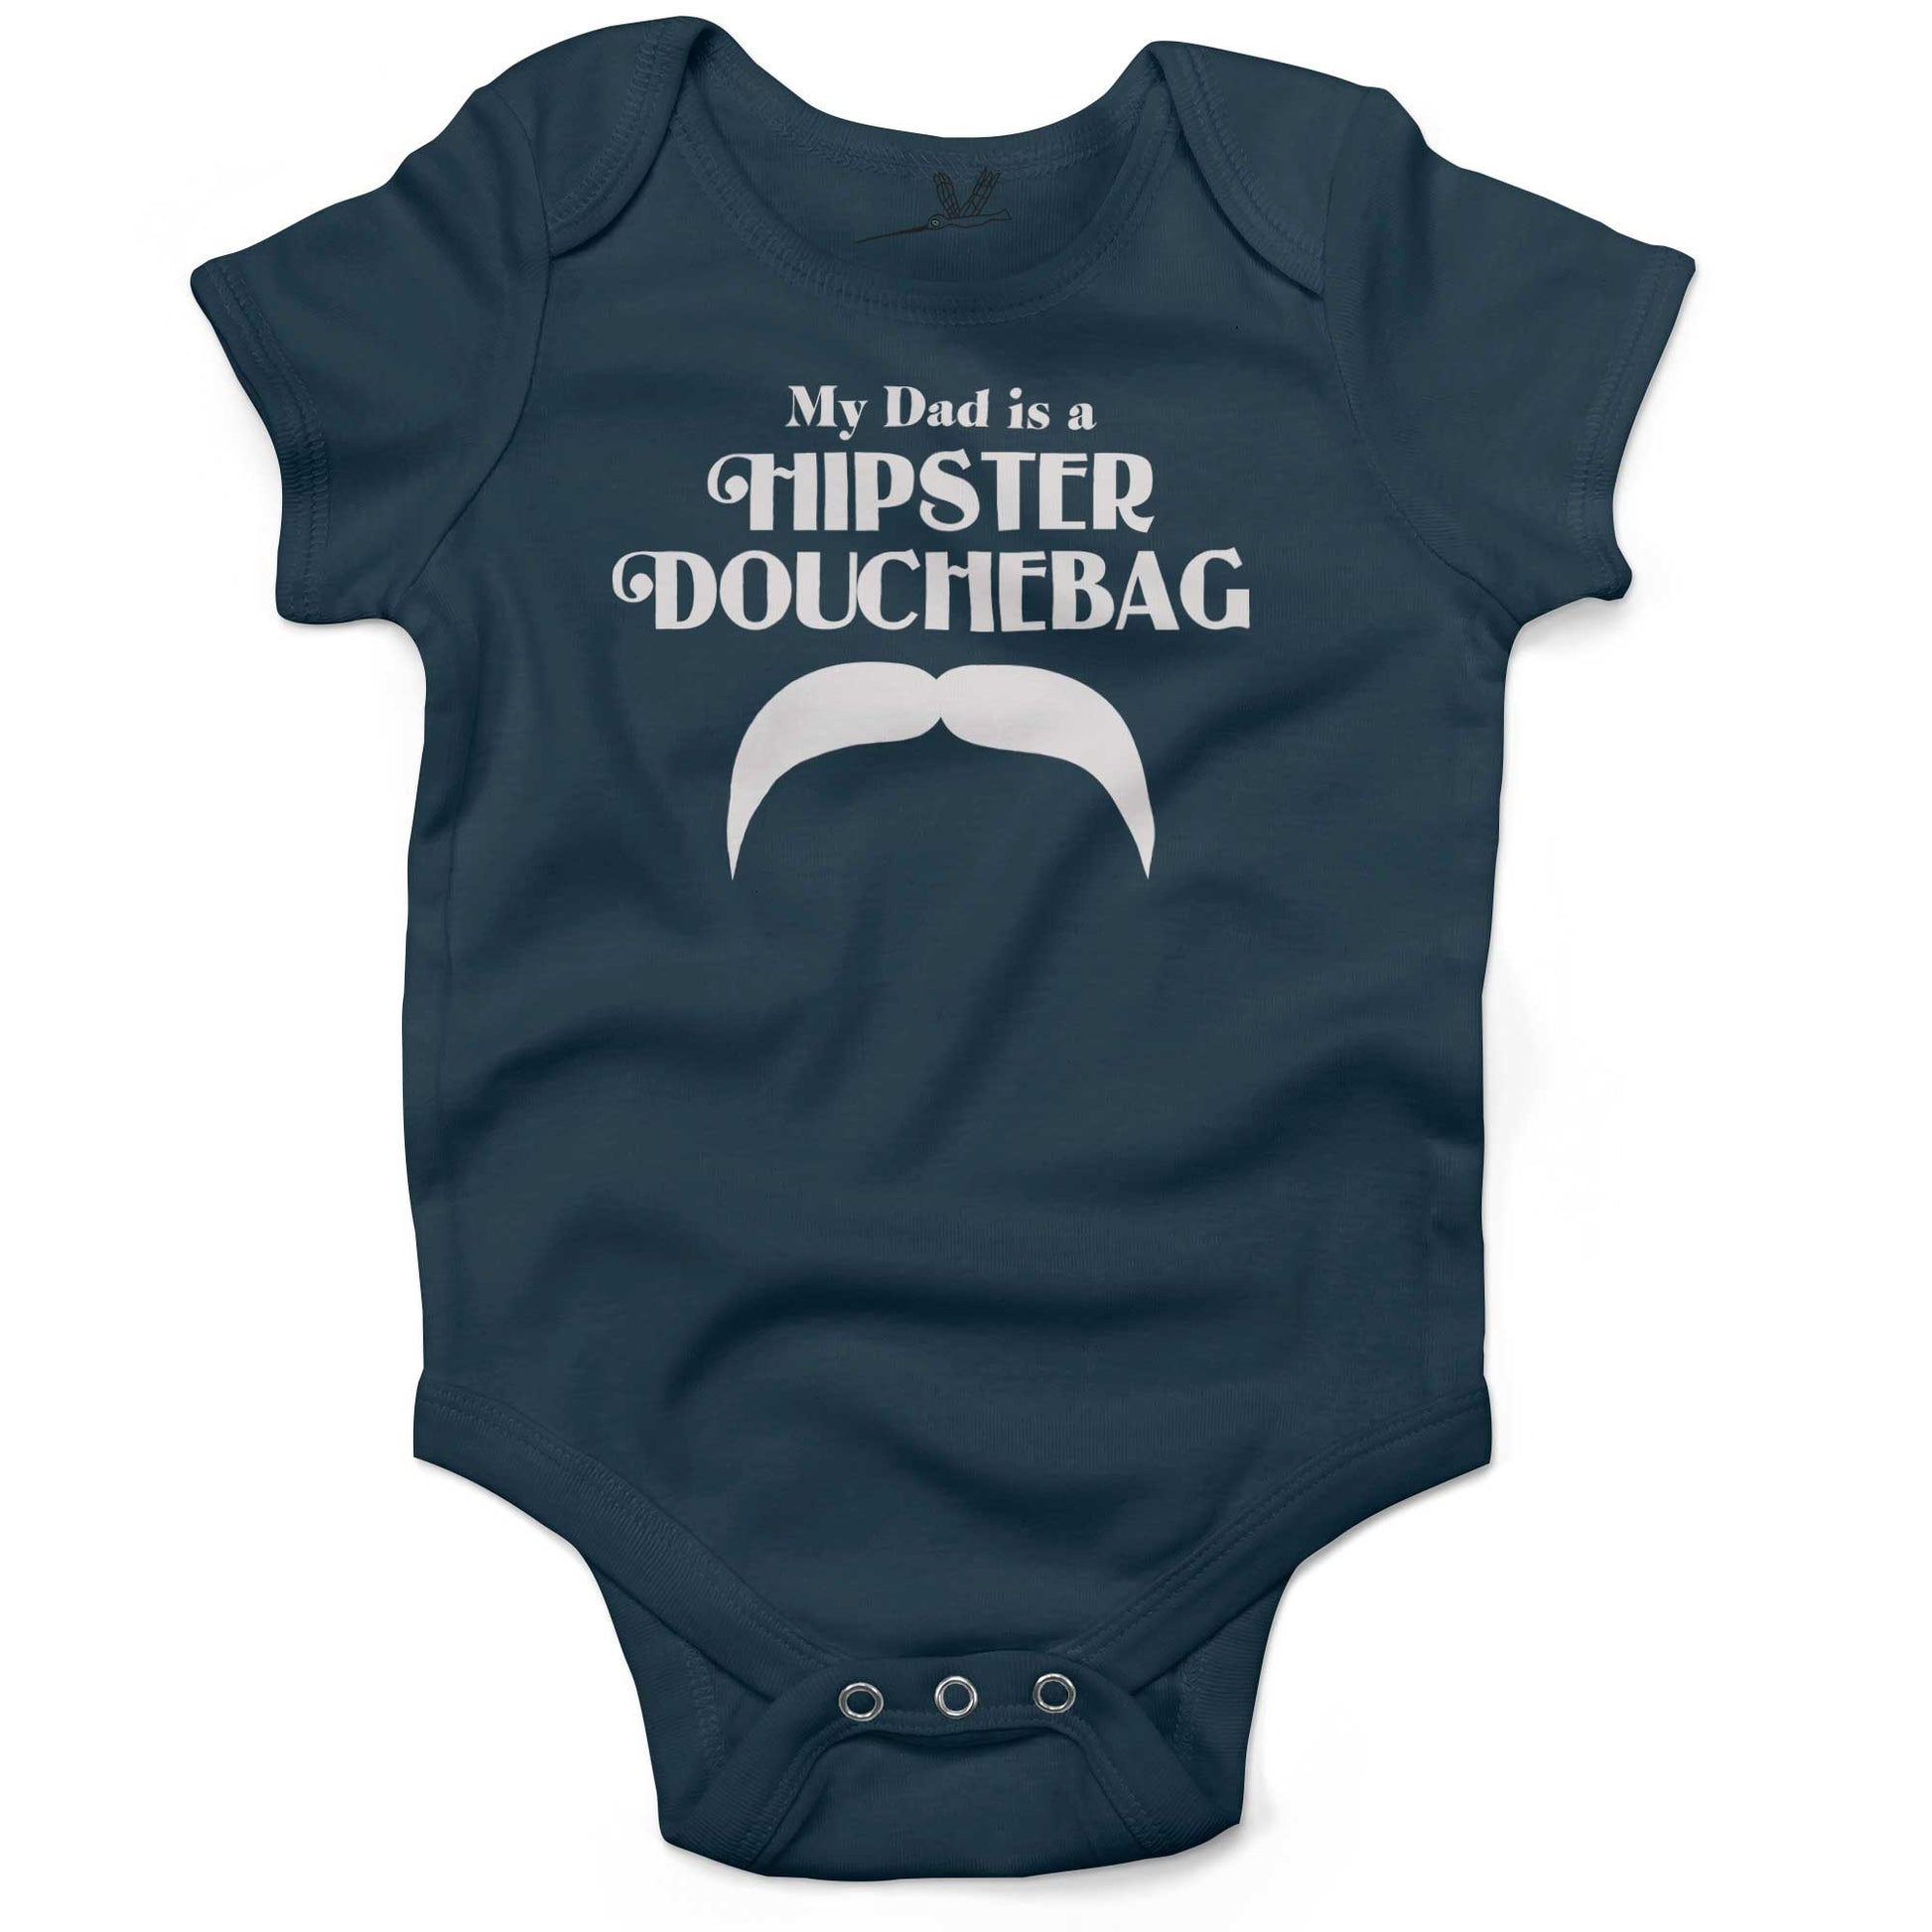 My Dad Is A Hipster DouchBag Infant Bodysuit or Raglan Baby Tee-Organic Pacific Blue-3-6 months